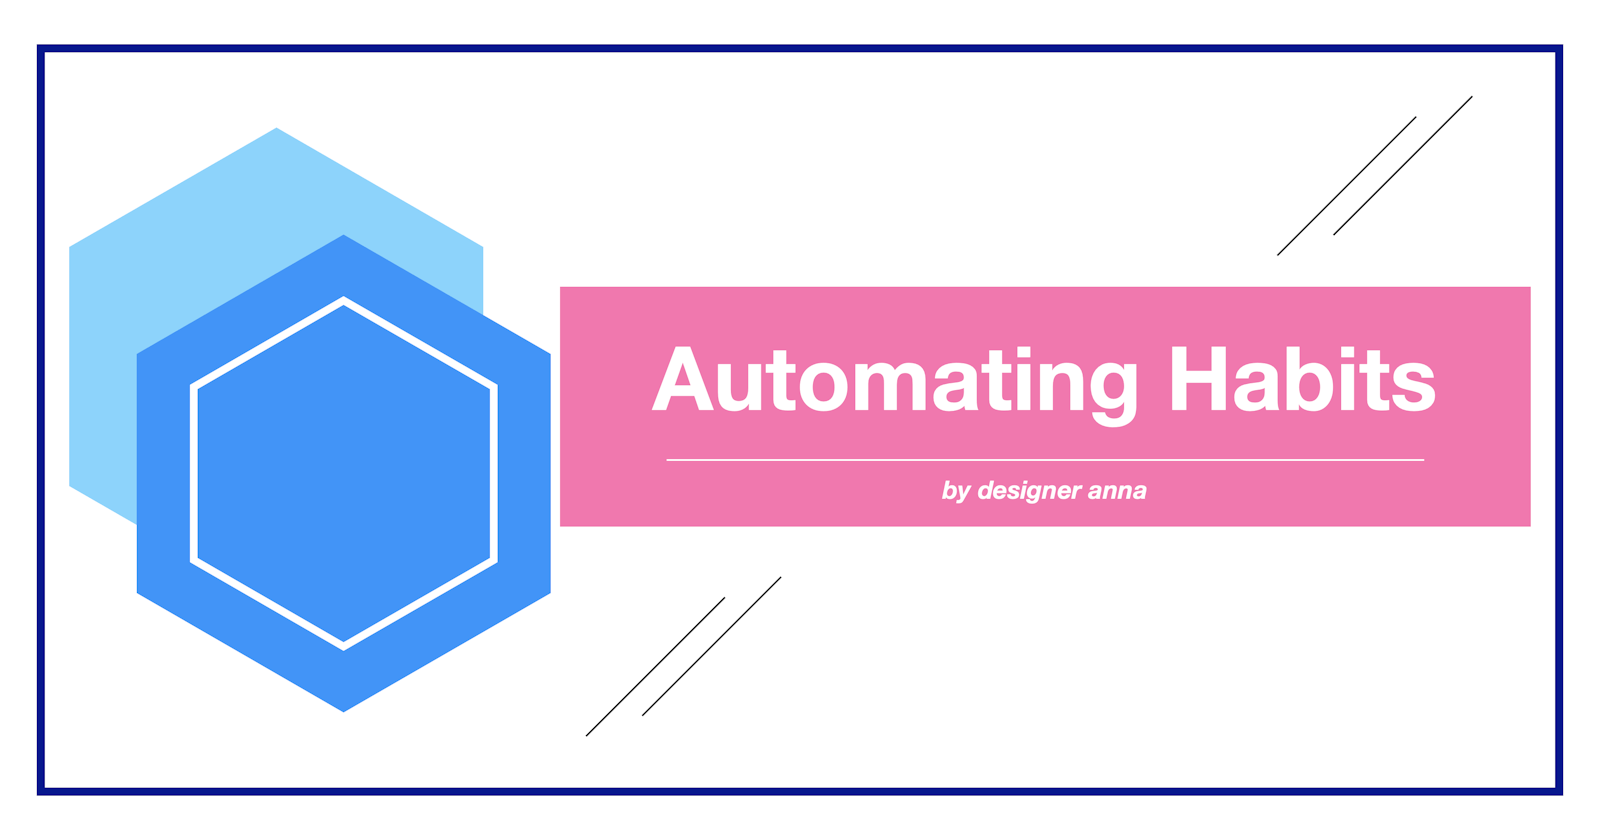 Automating our habits